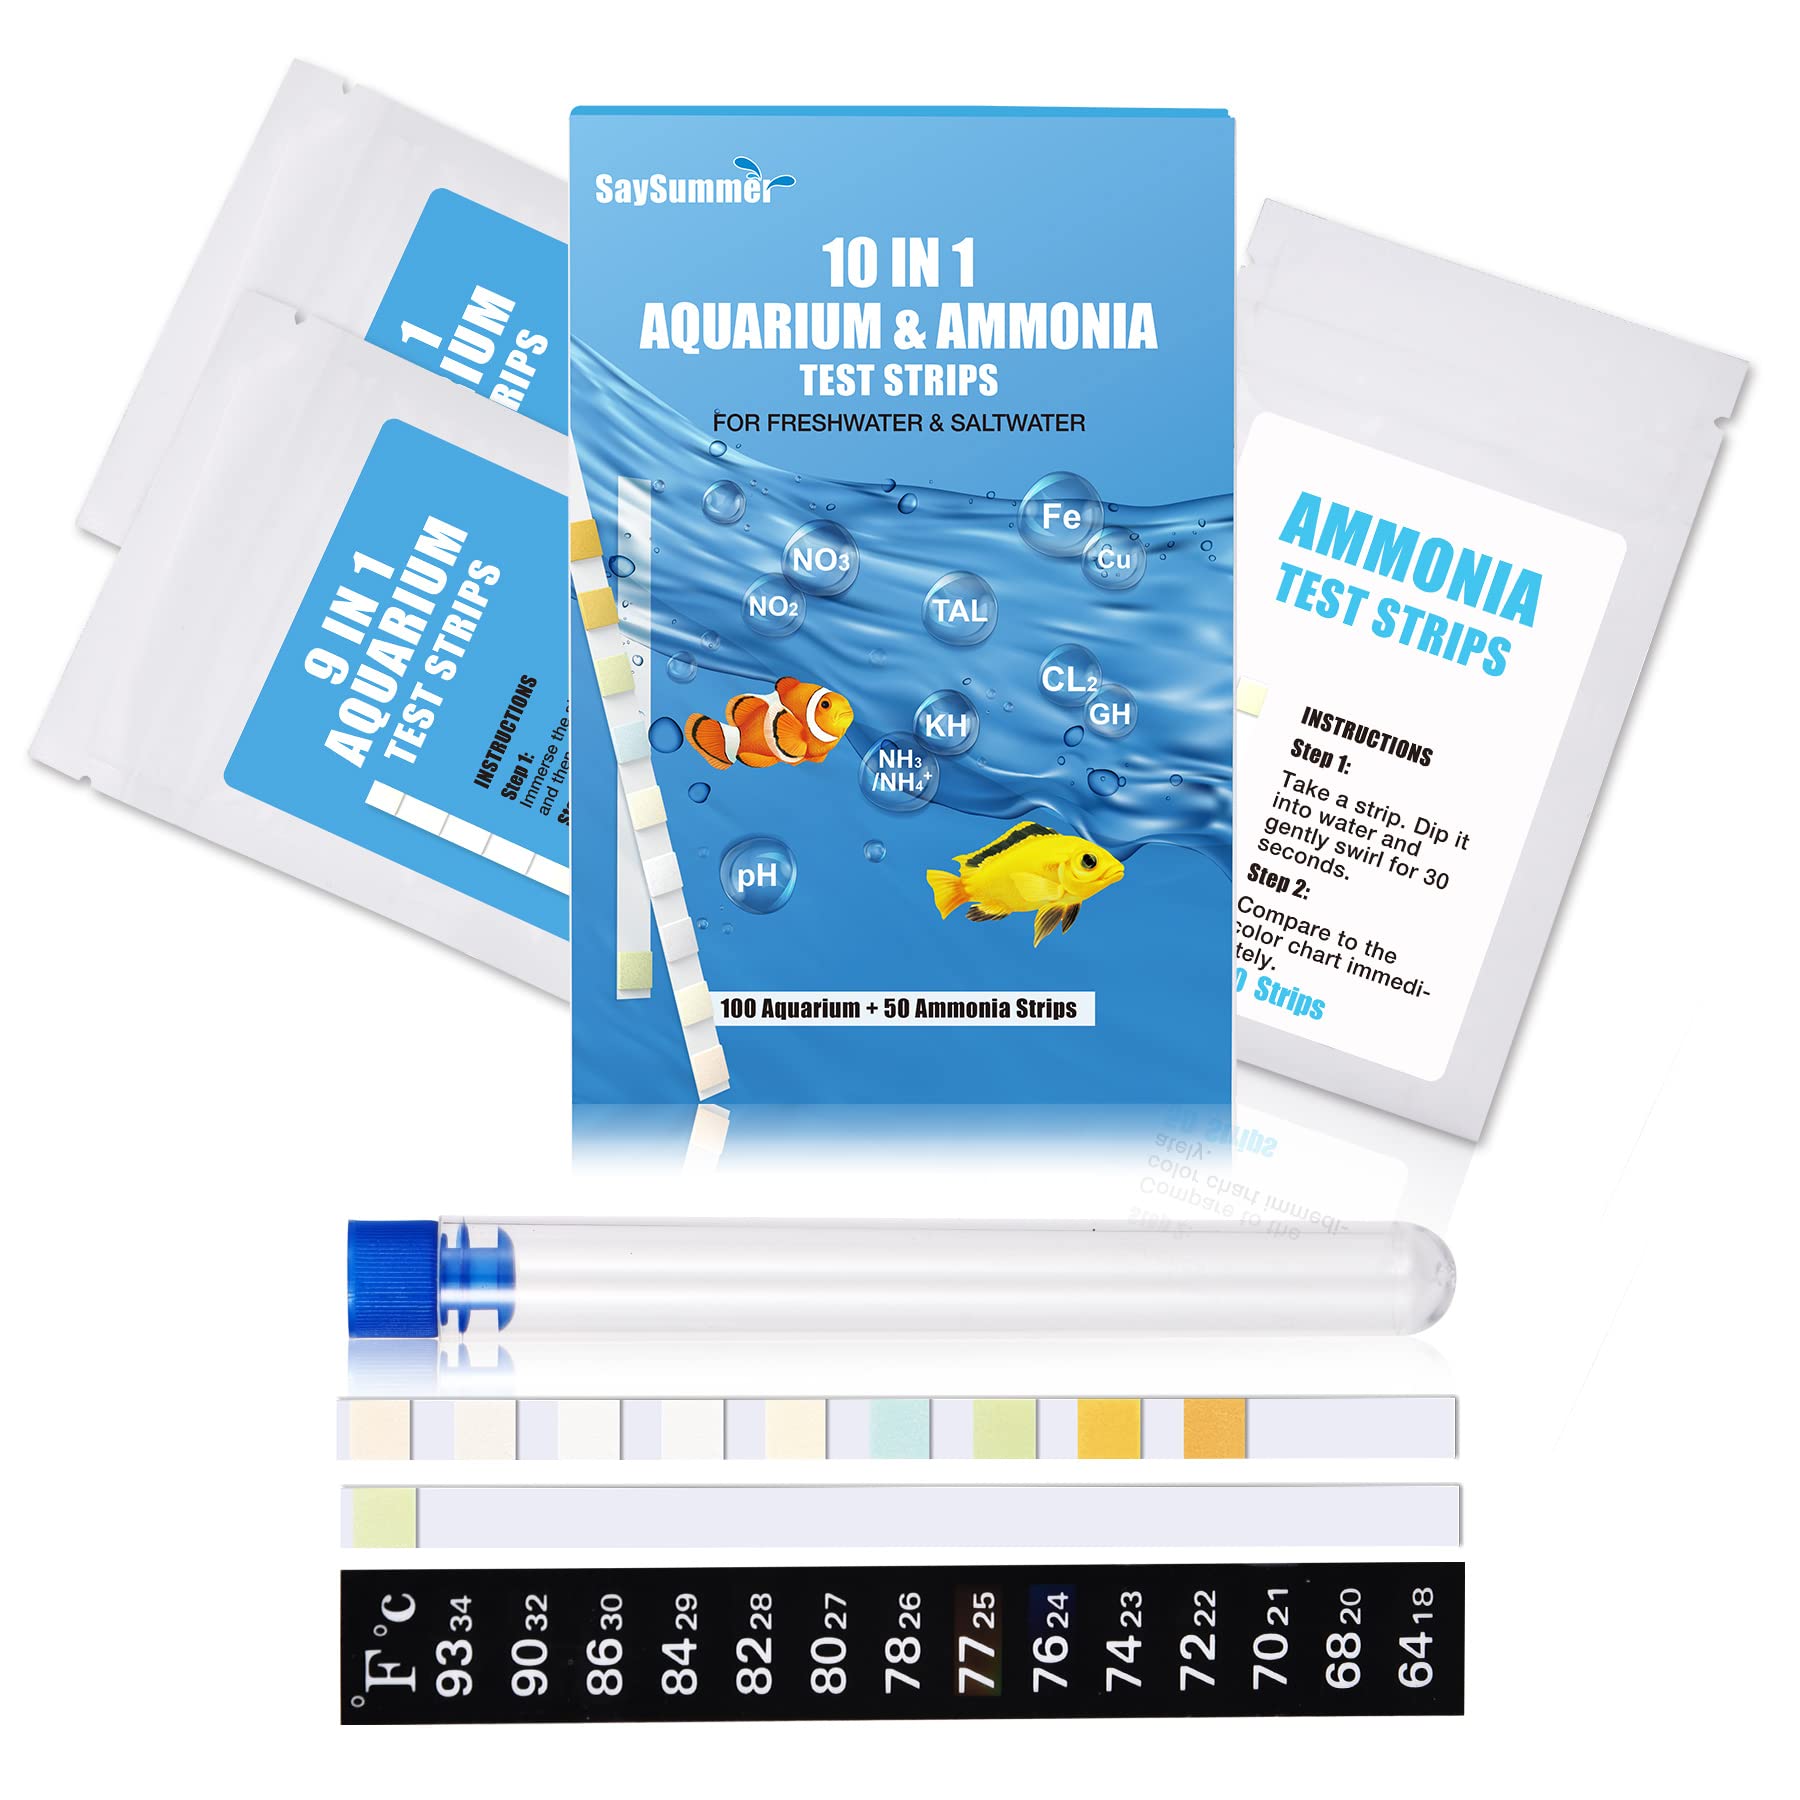 Brand: "9-in-1 Aquarium Test Strips - 100 Strips for Freshwater and Saltwater"